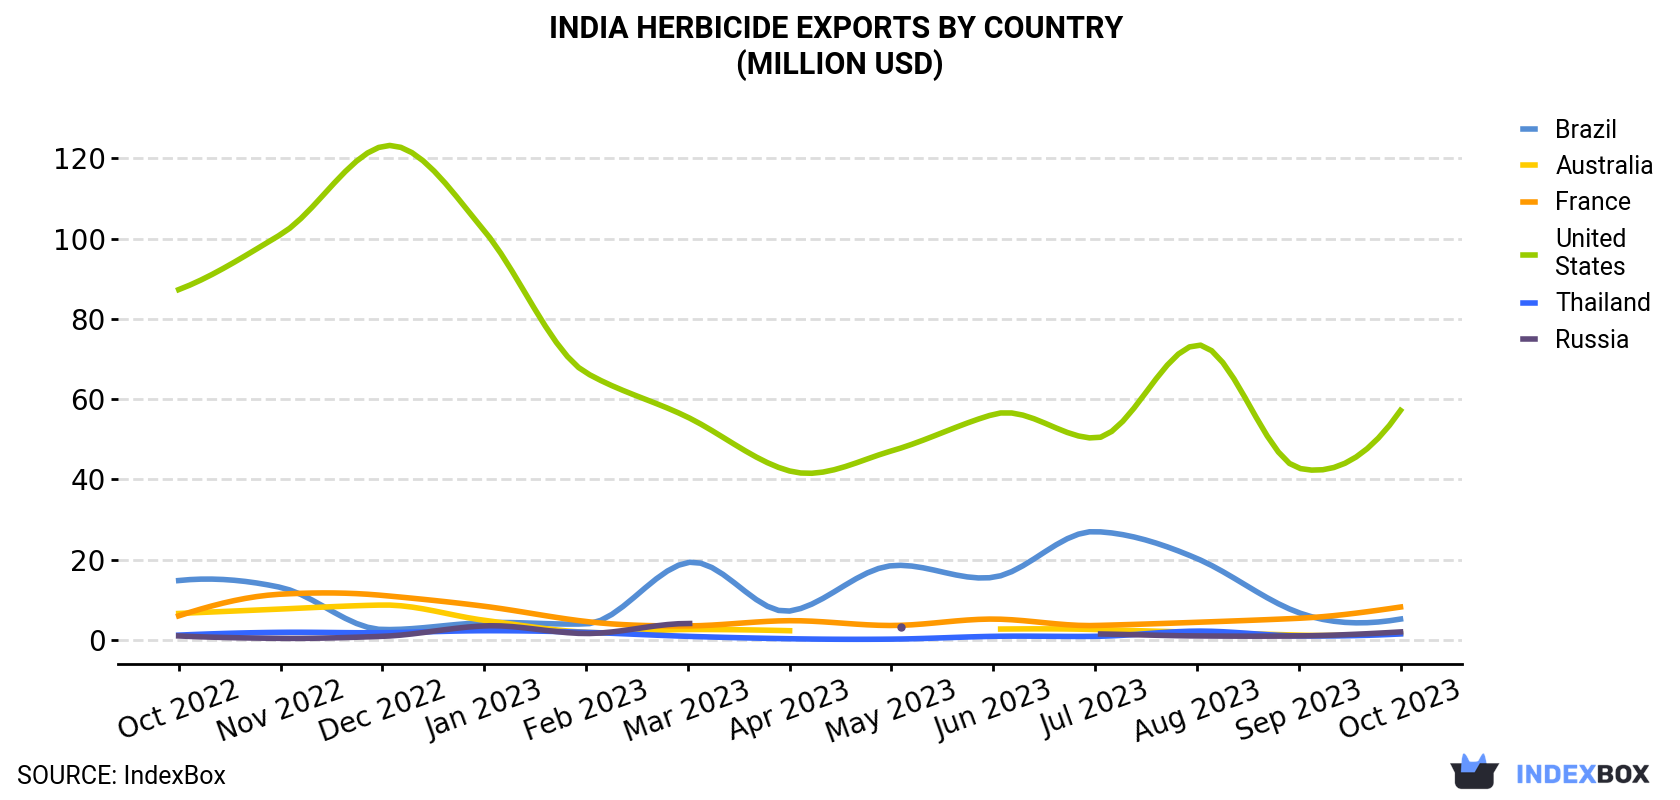 India Herbicide Exports By Country (Million USD)